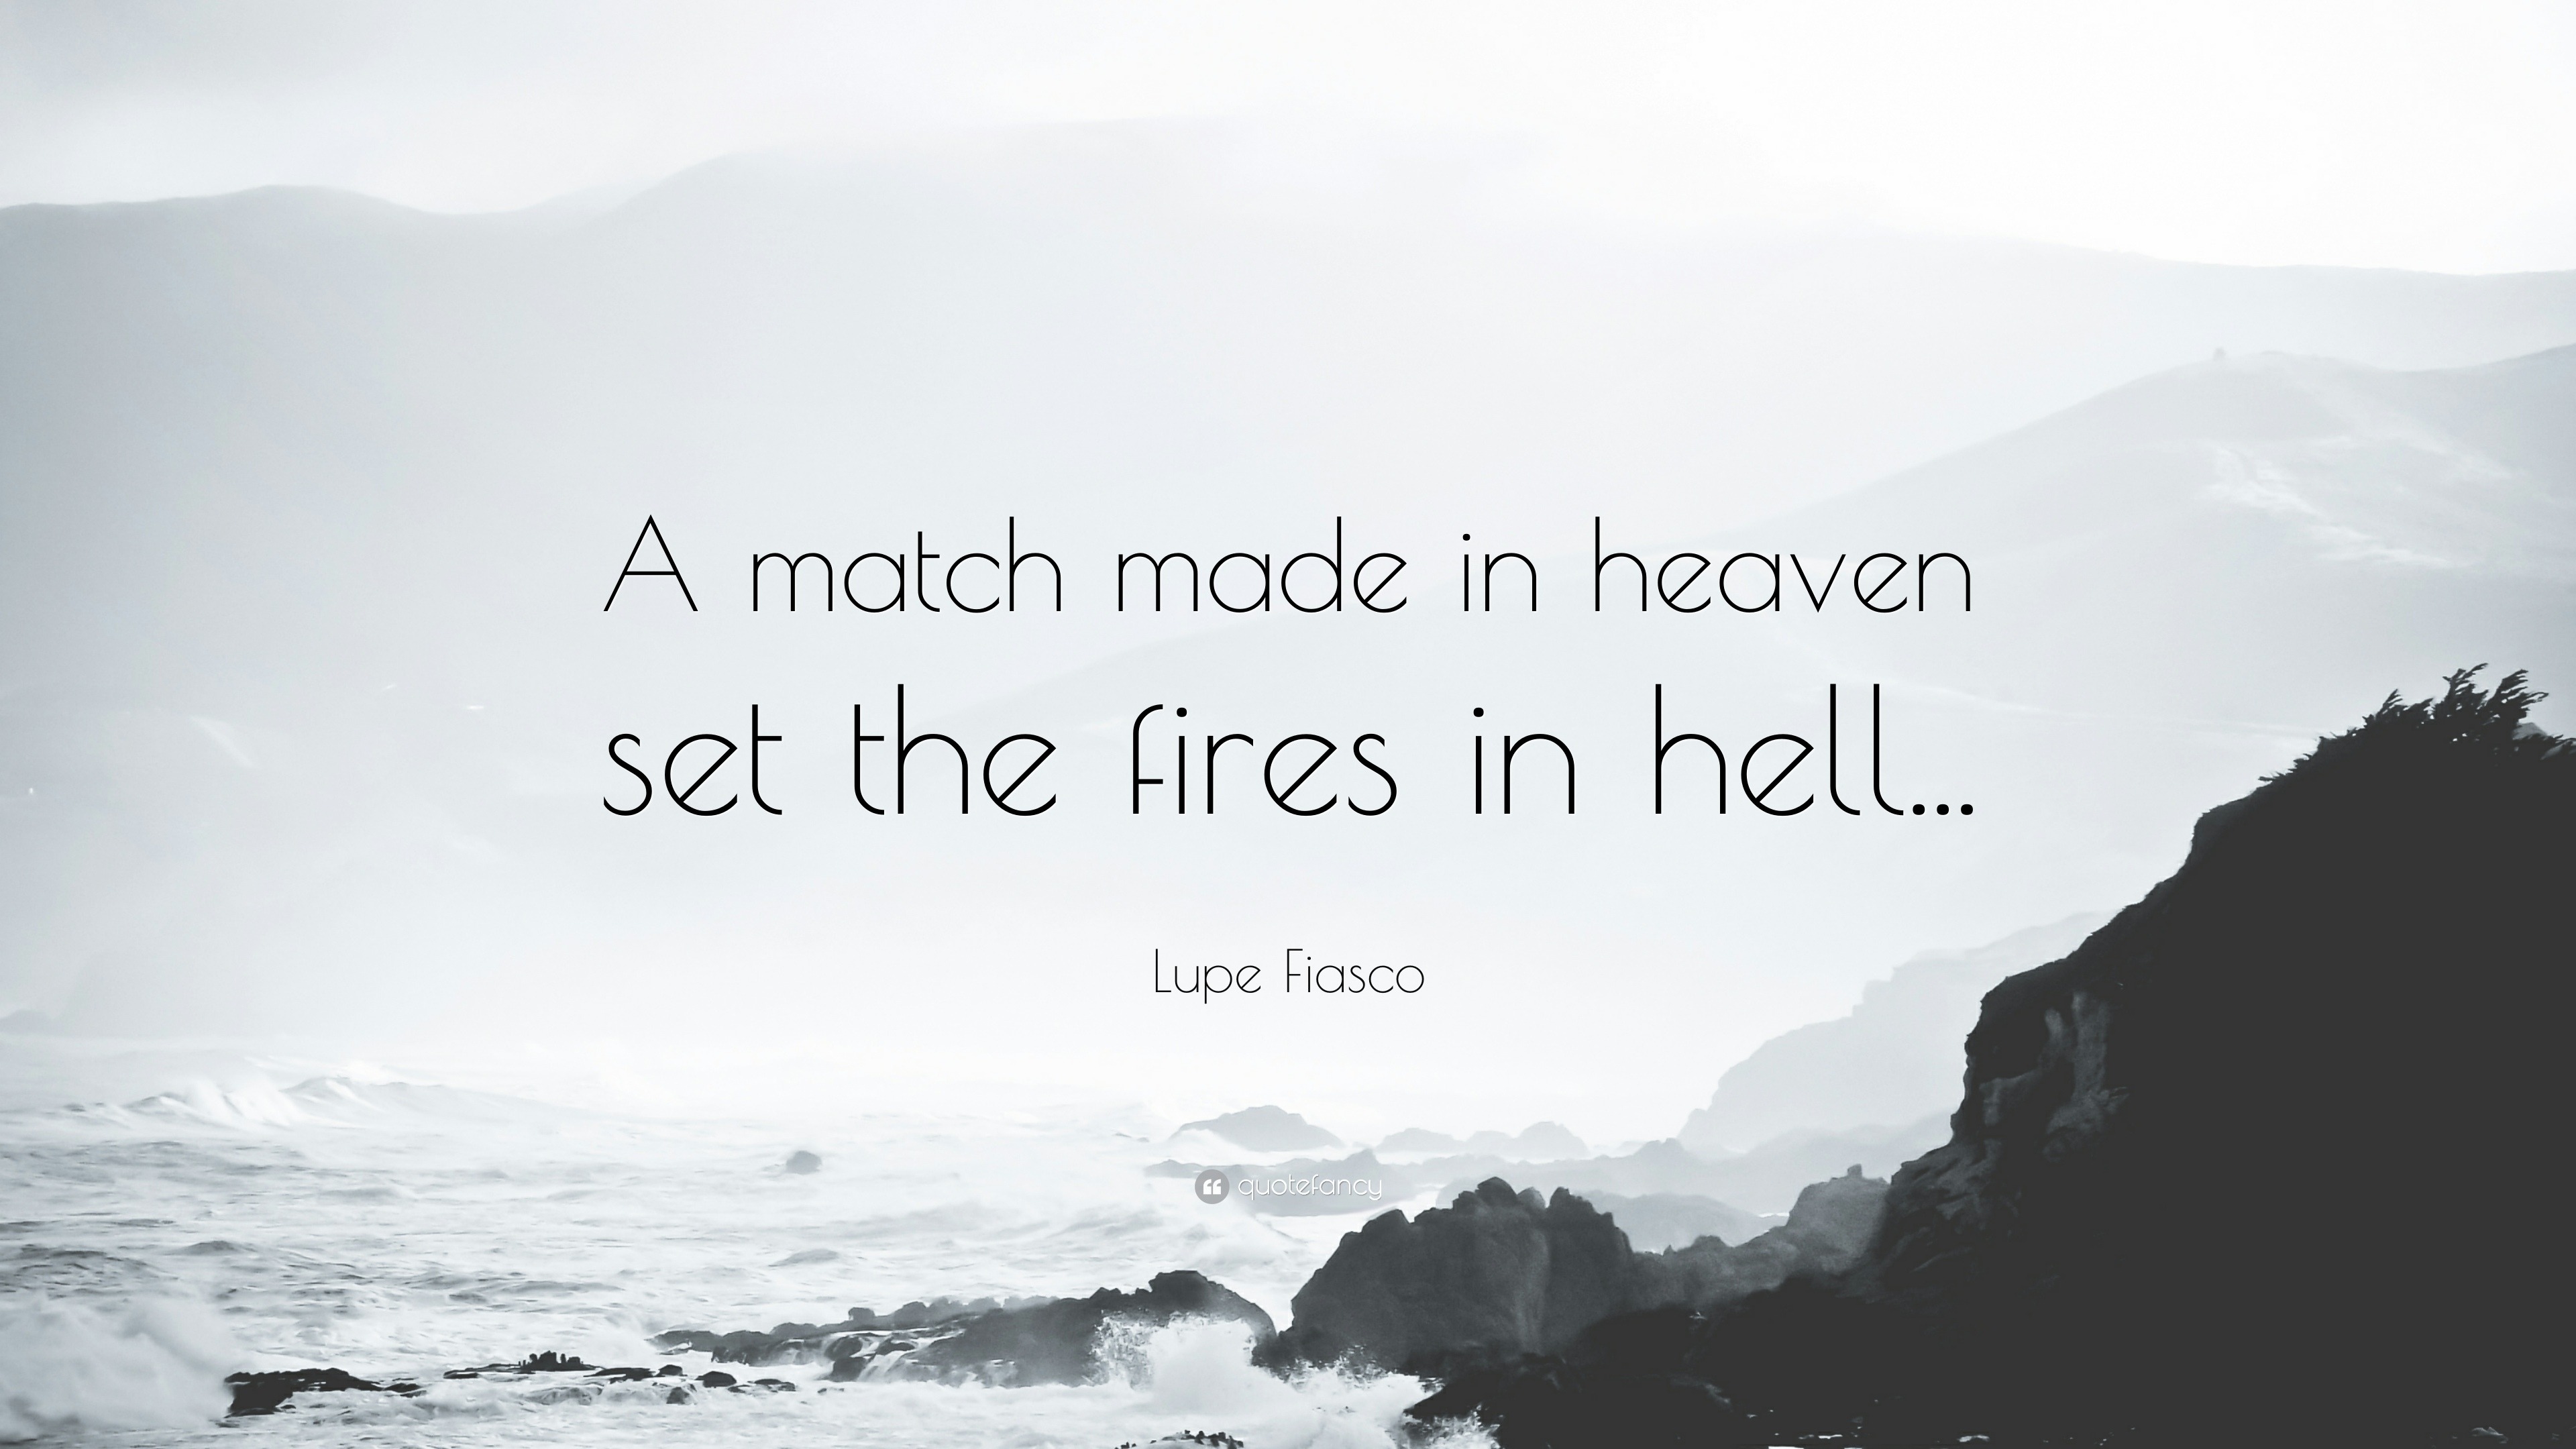 Lupe Fiasco Quote: “A Match Made In Heaven Set The Fires In Hell...”